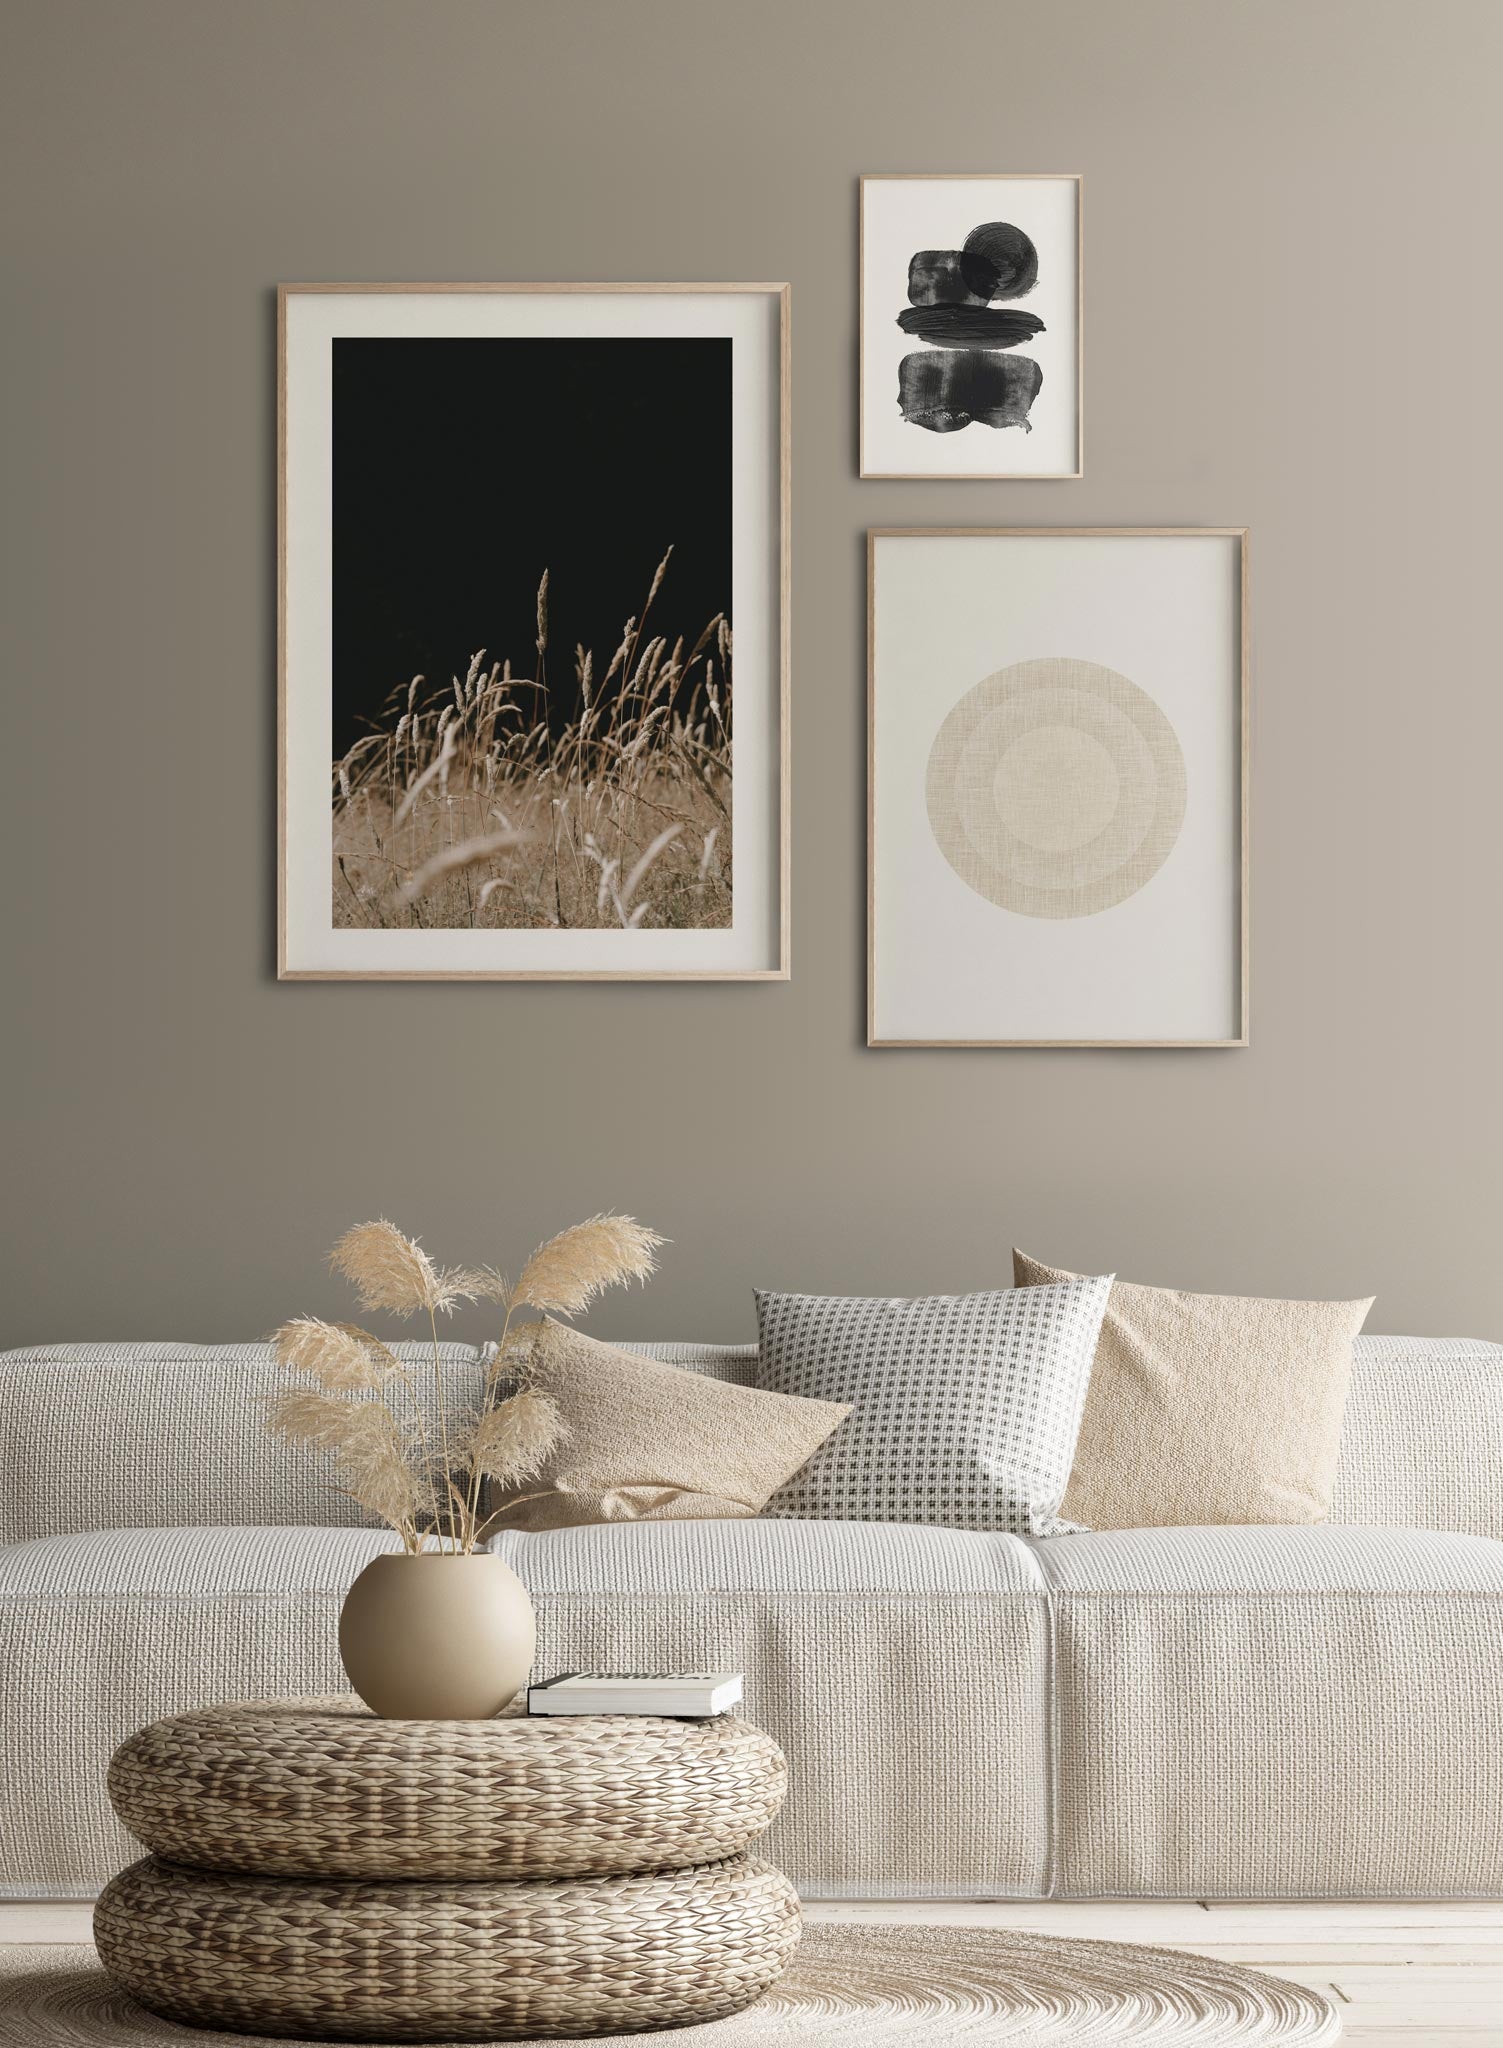 "A Night in the Field" is a botanical photography poster by Opposite Wall of wispy beige grasses under a pitch black night sky.